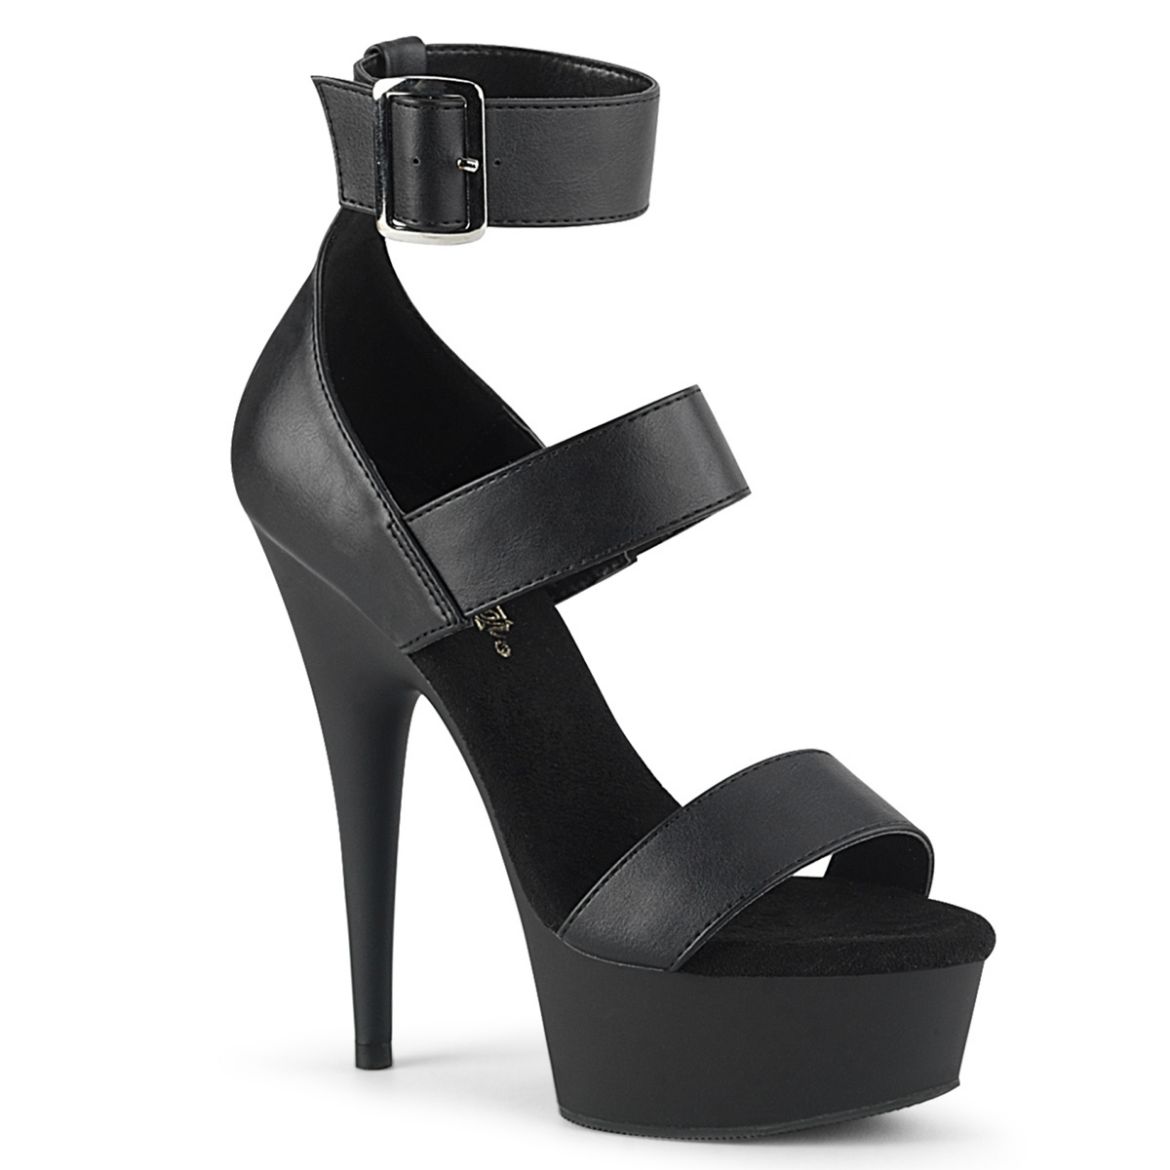 Product image of Pleaser DELIGHT-629 Blk Faux Leather/Blk Matte 6 Inch Heel 1 3/4 Inch PF Close Back Triple Band Ankle Strap Sandal